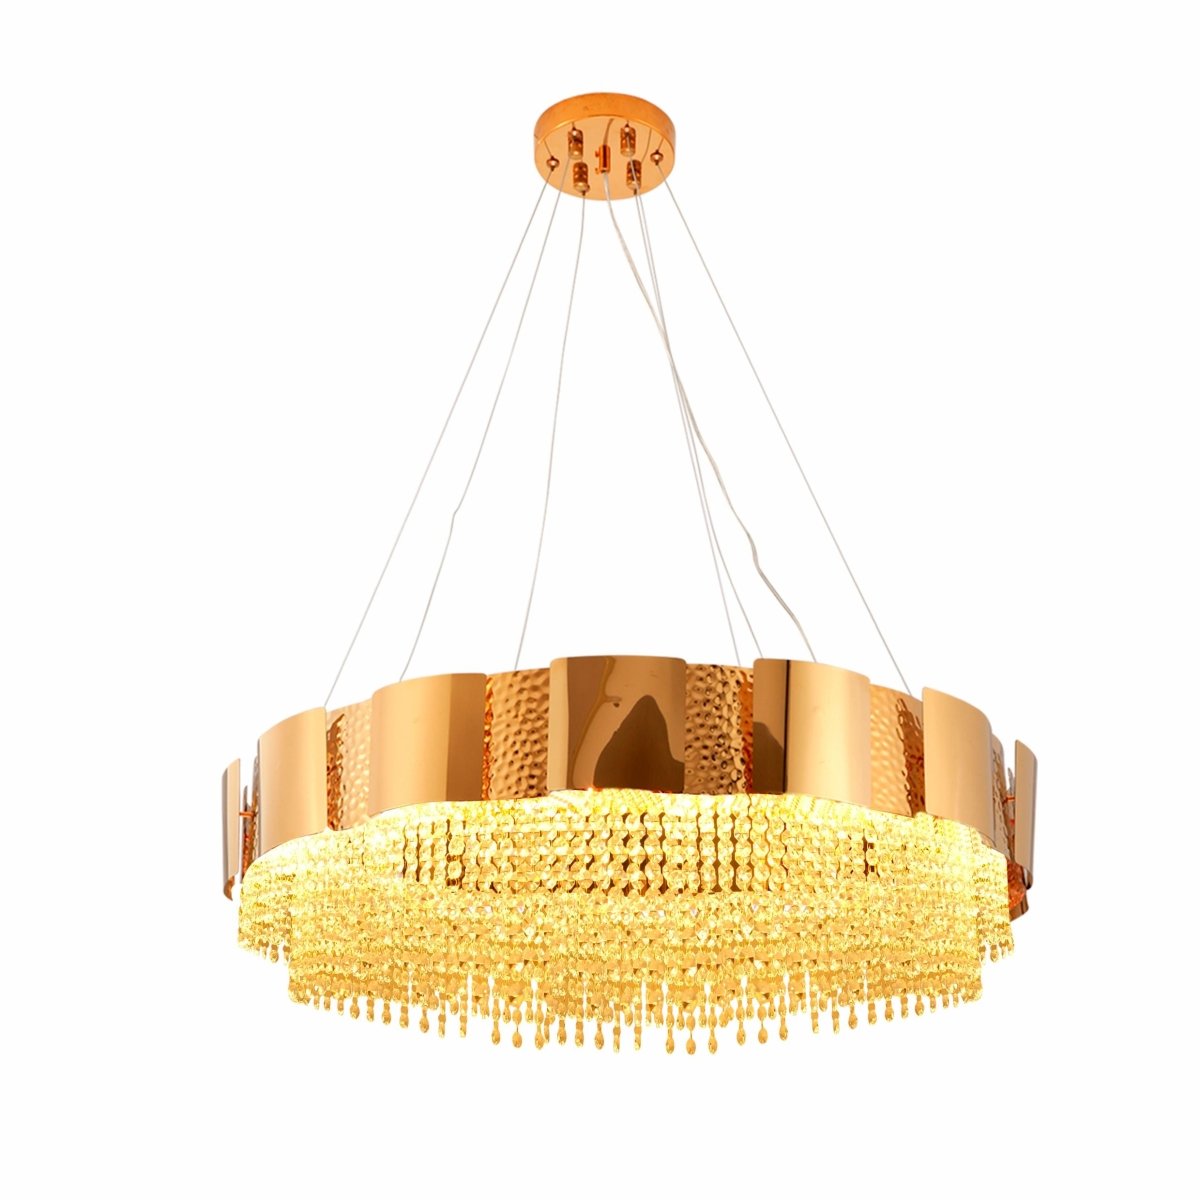 Main image of Octagon Crystal Gold Metal Chandelier D1000 with 16xE14 Fitting | TEKLED 156-19580